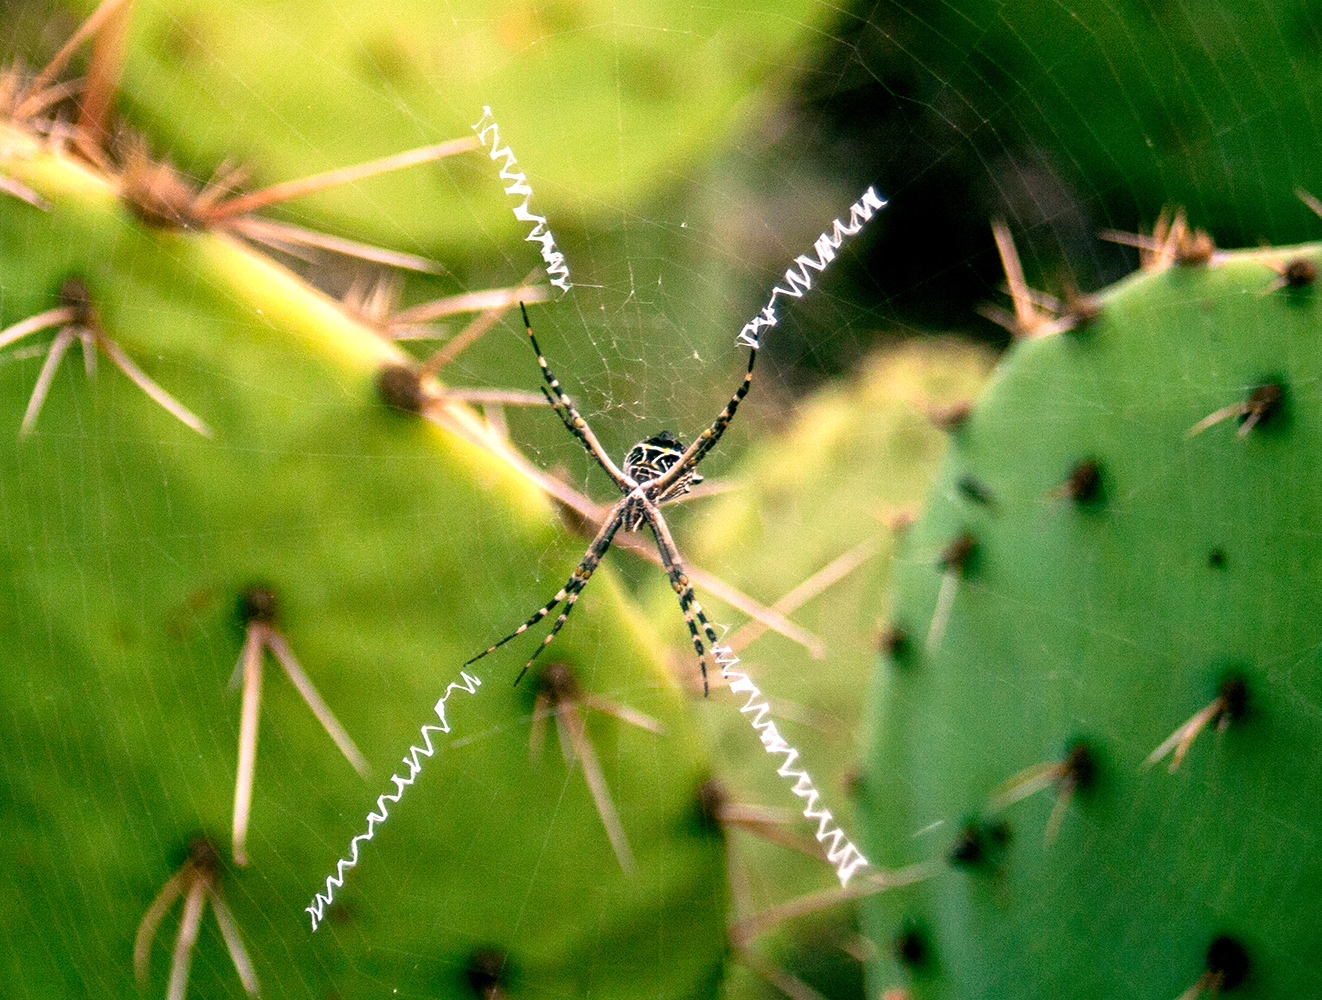 A spider on a web with crossed zig-zag patterns